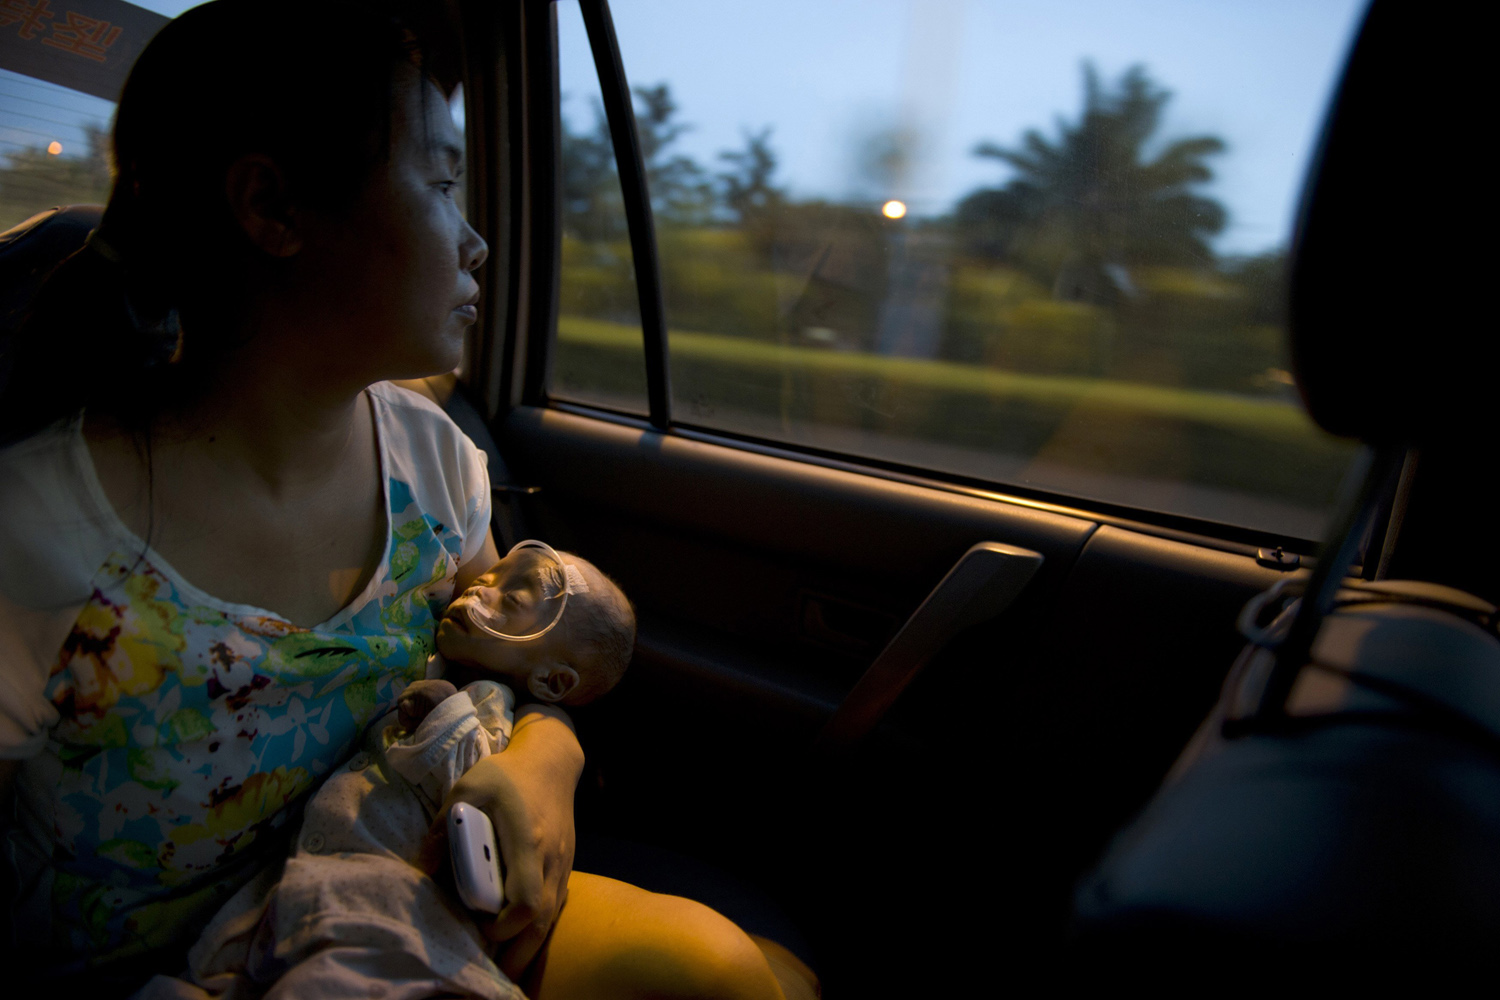 Wu, holds her daughter Yuanyuan, who is suffering from an unknown disease, as she looks out of the window on a taxi in Shenzhen